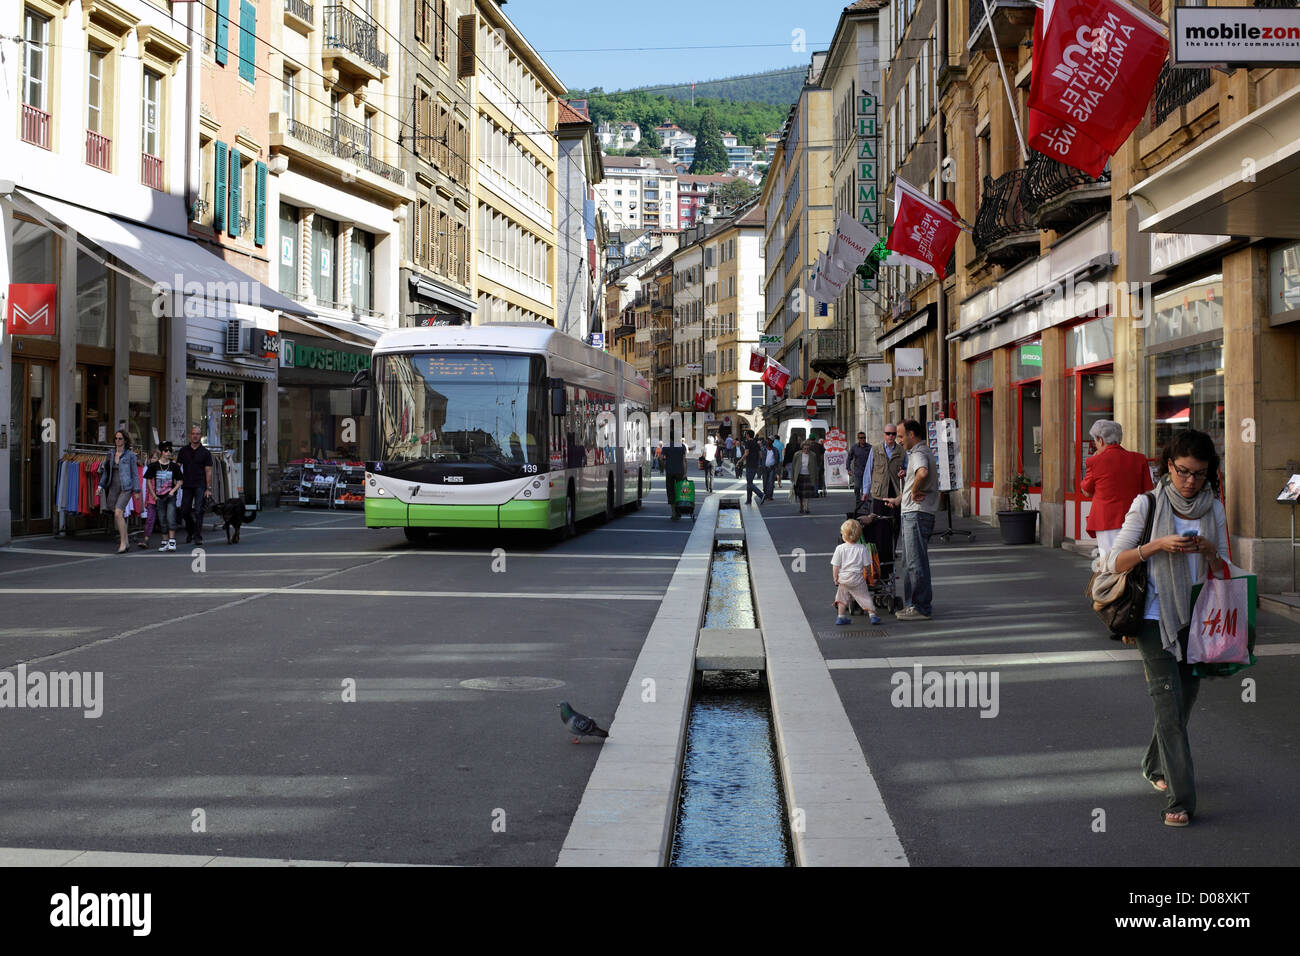 A modern trolleybus in the otherwise pedestrianised Rue du Seyon, in the centre of Neuchatel, Switzerland. Stock Photo